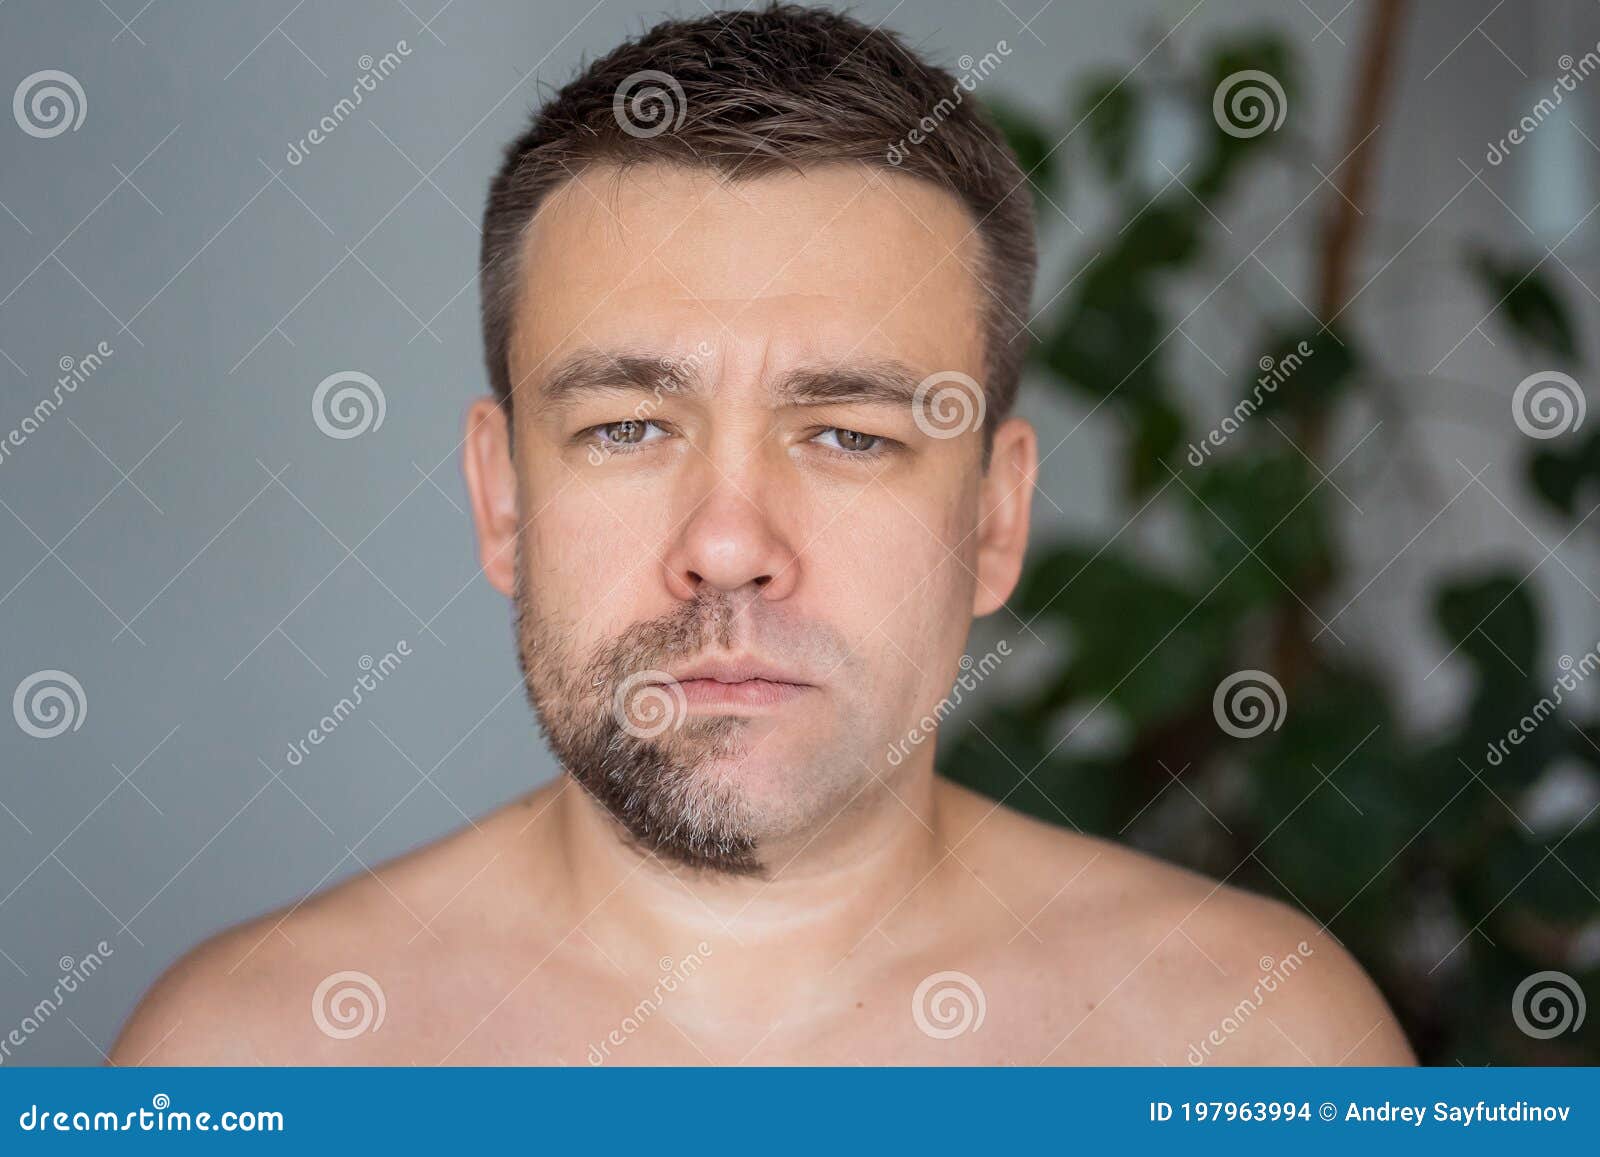 Sad Man with Stubble on One Side, Shaved on Other Stock Photo - Image of  humor, routine: 197963994